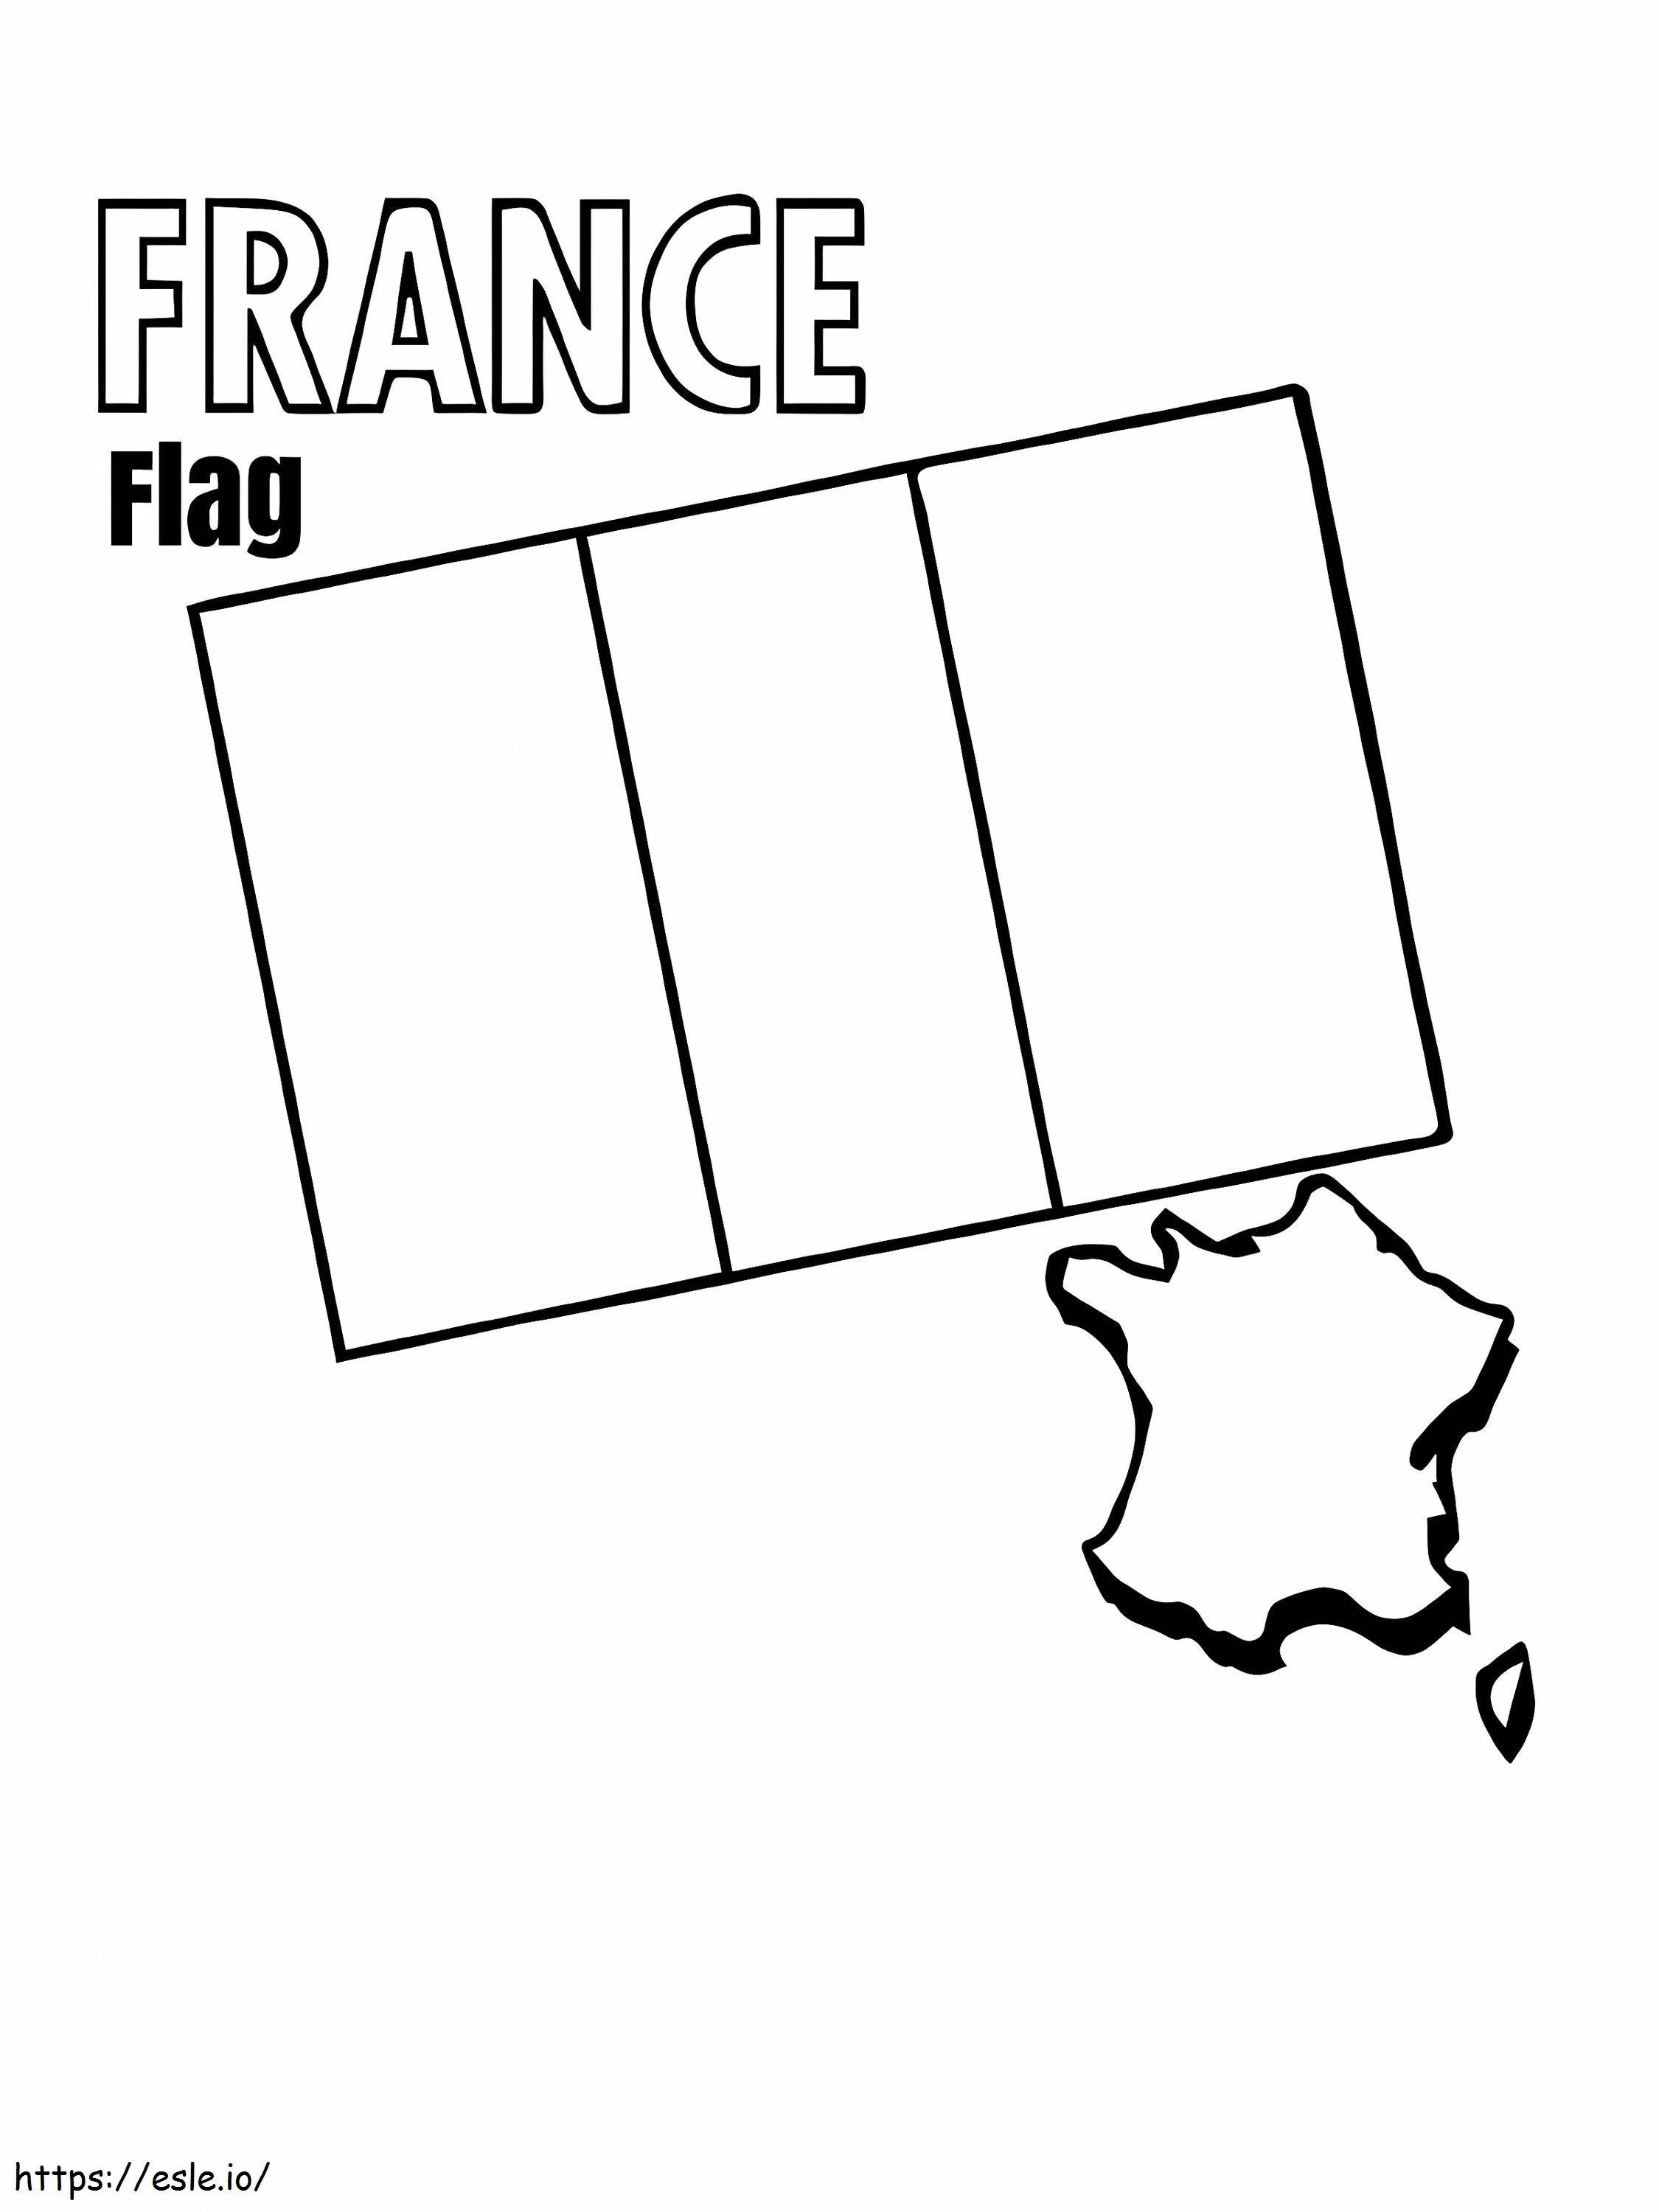 France Flag And Map coloring page